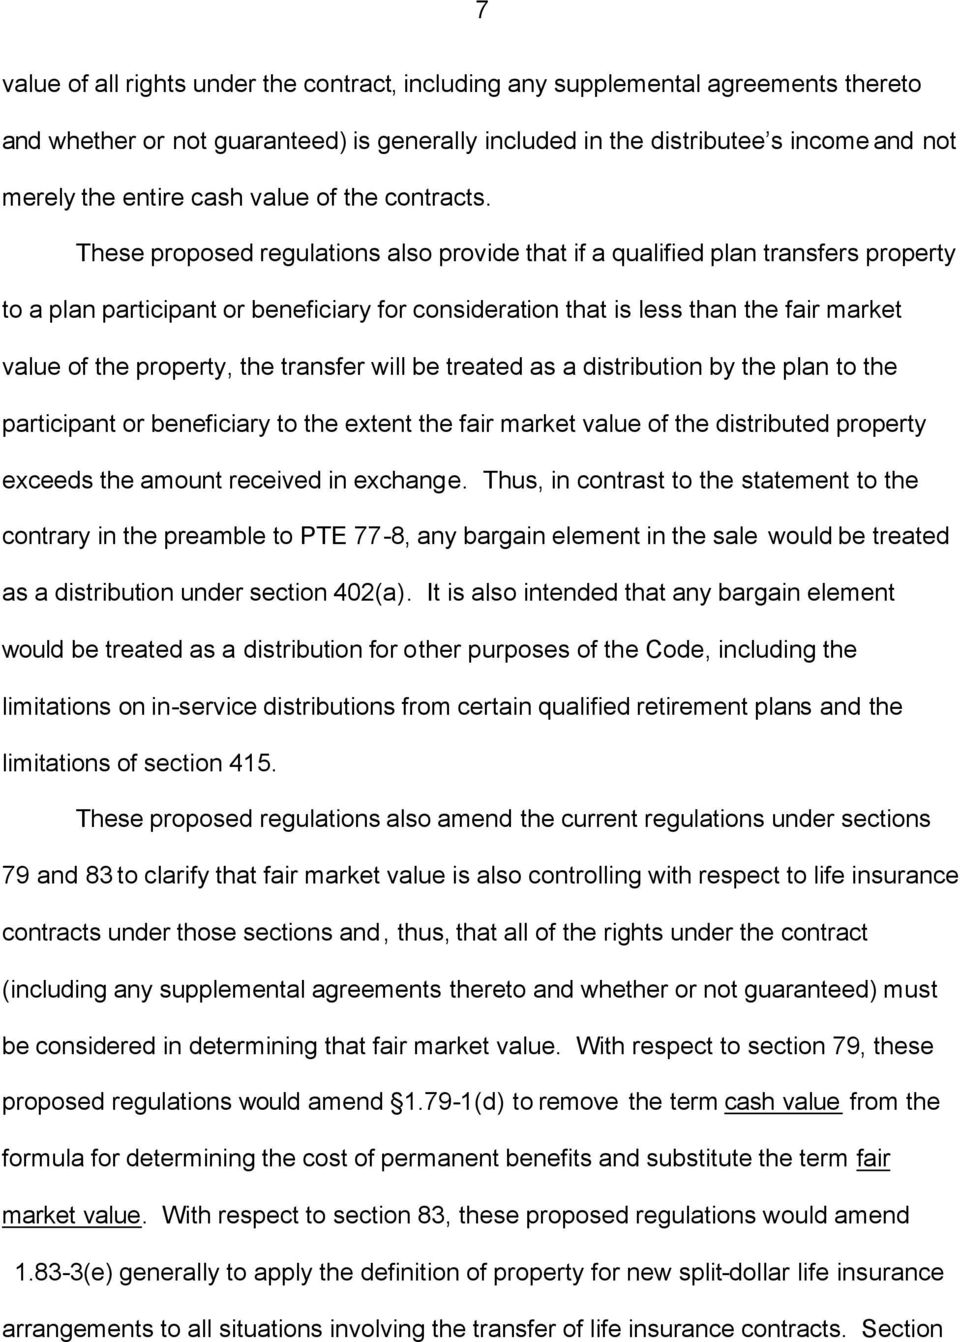 These proposed regulations also provide that if a qualified plan transfers property to a plan participant or beneficiary for consideration that is less than the fair market value of the property, the